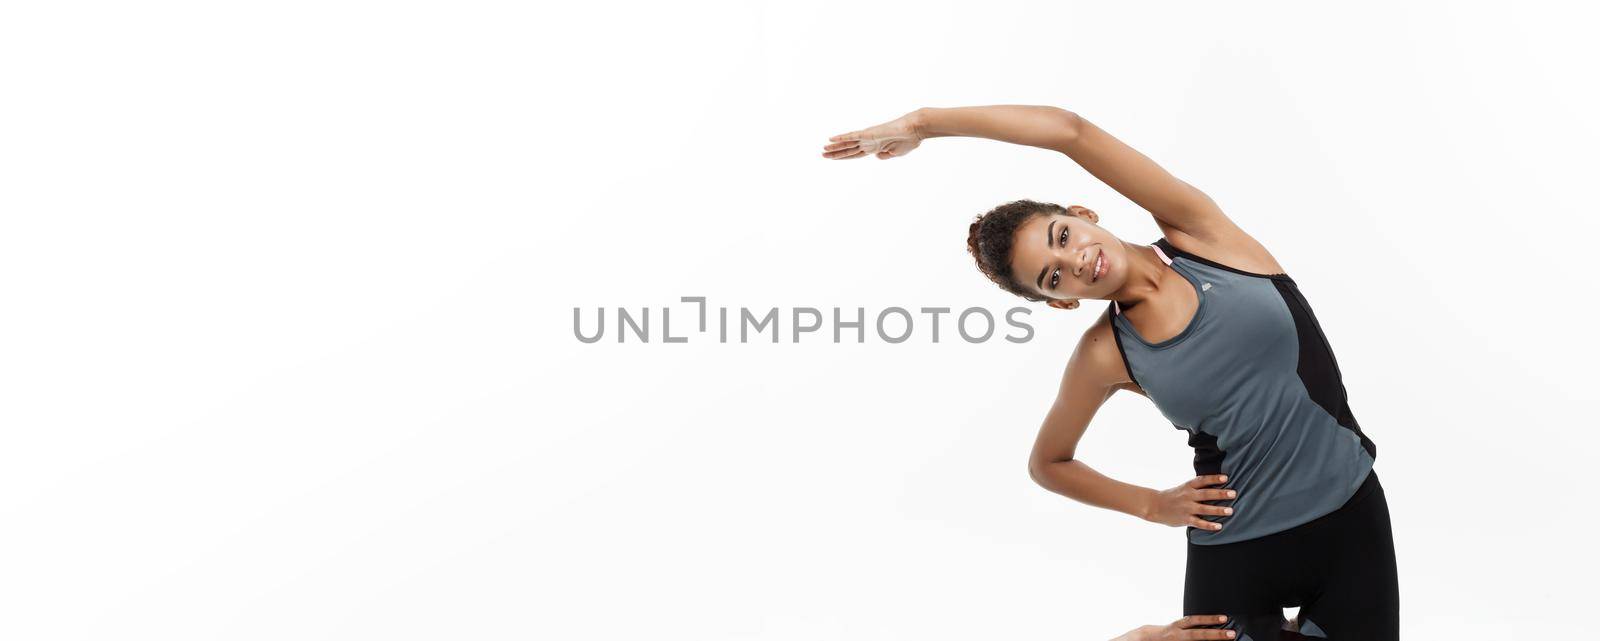 Sport, training, lifestyle and Fitness concept - portrait of beautiful happy African American woman stretching hands. Isolated on white studio background